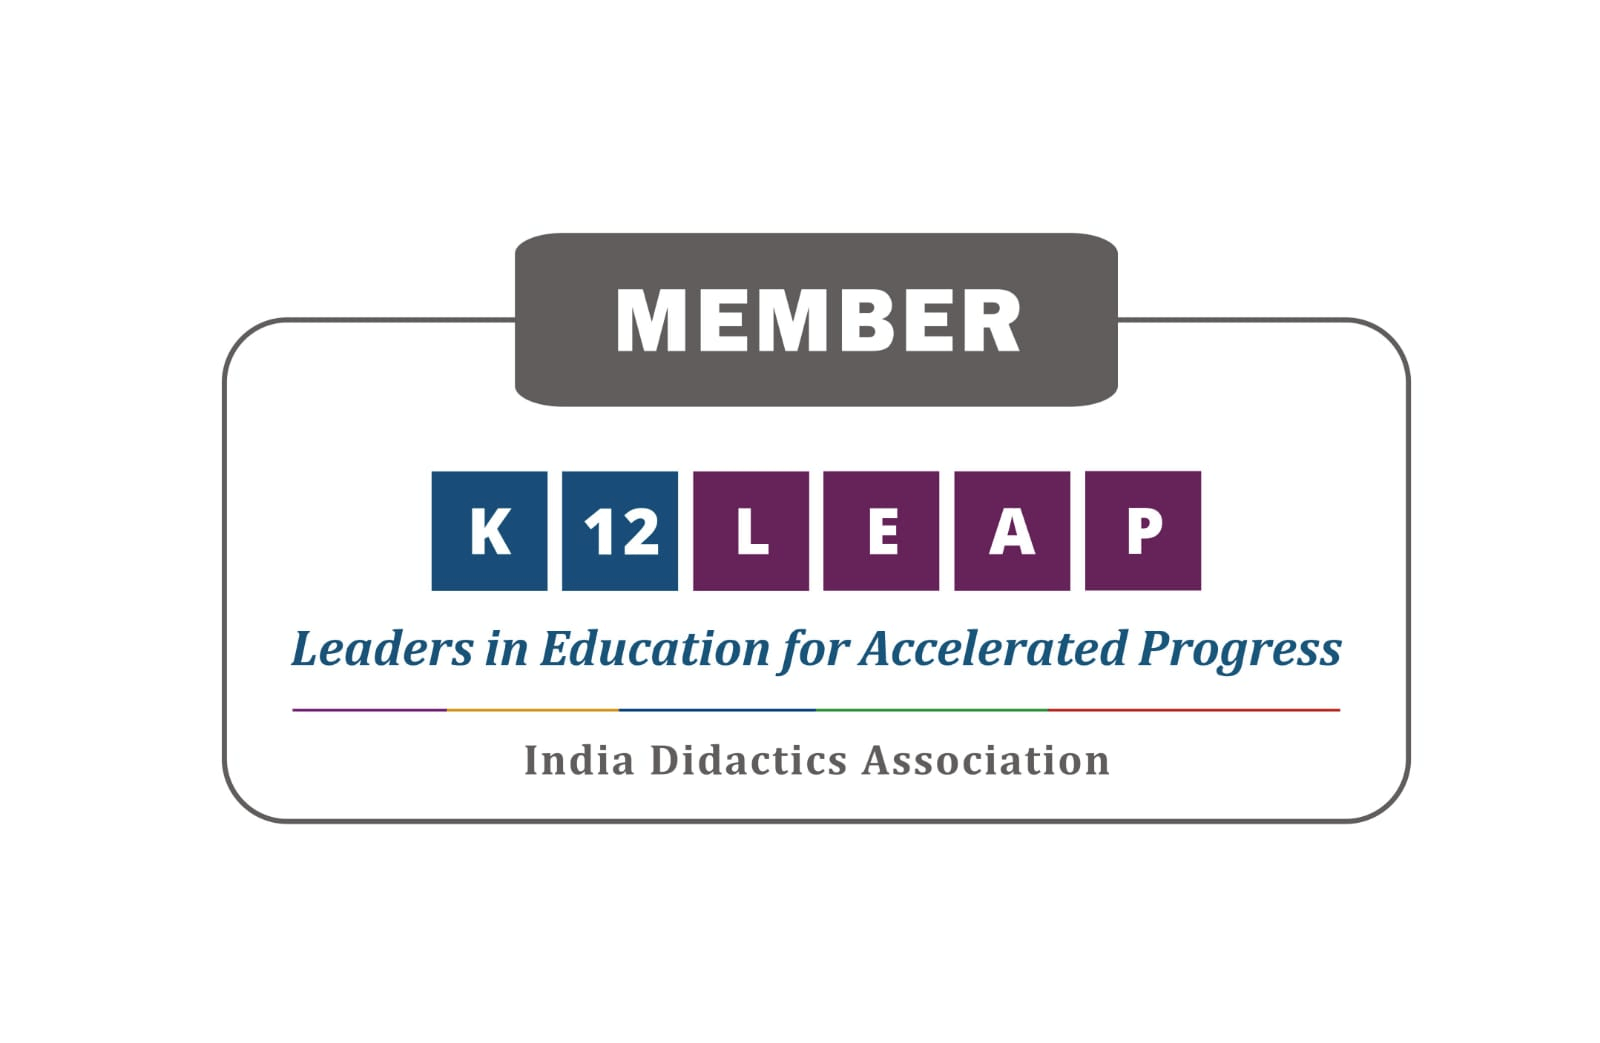 K-12 Leap - Leaders in Education for Accelerated Progress